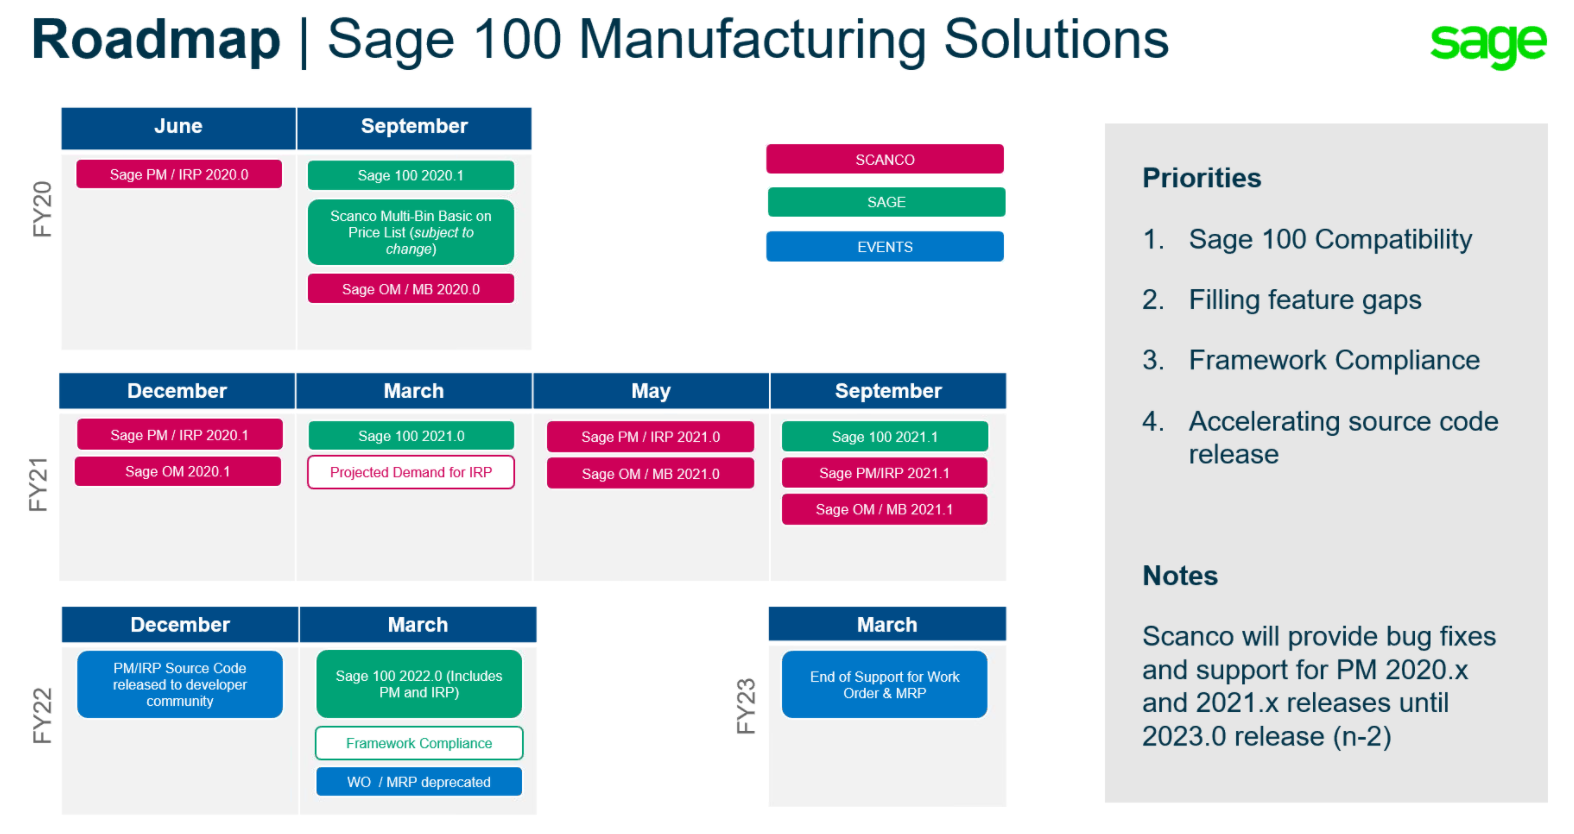 Roadmap Sage 100 Manufacturing Solutions